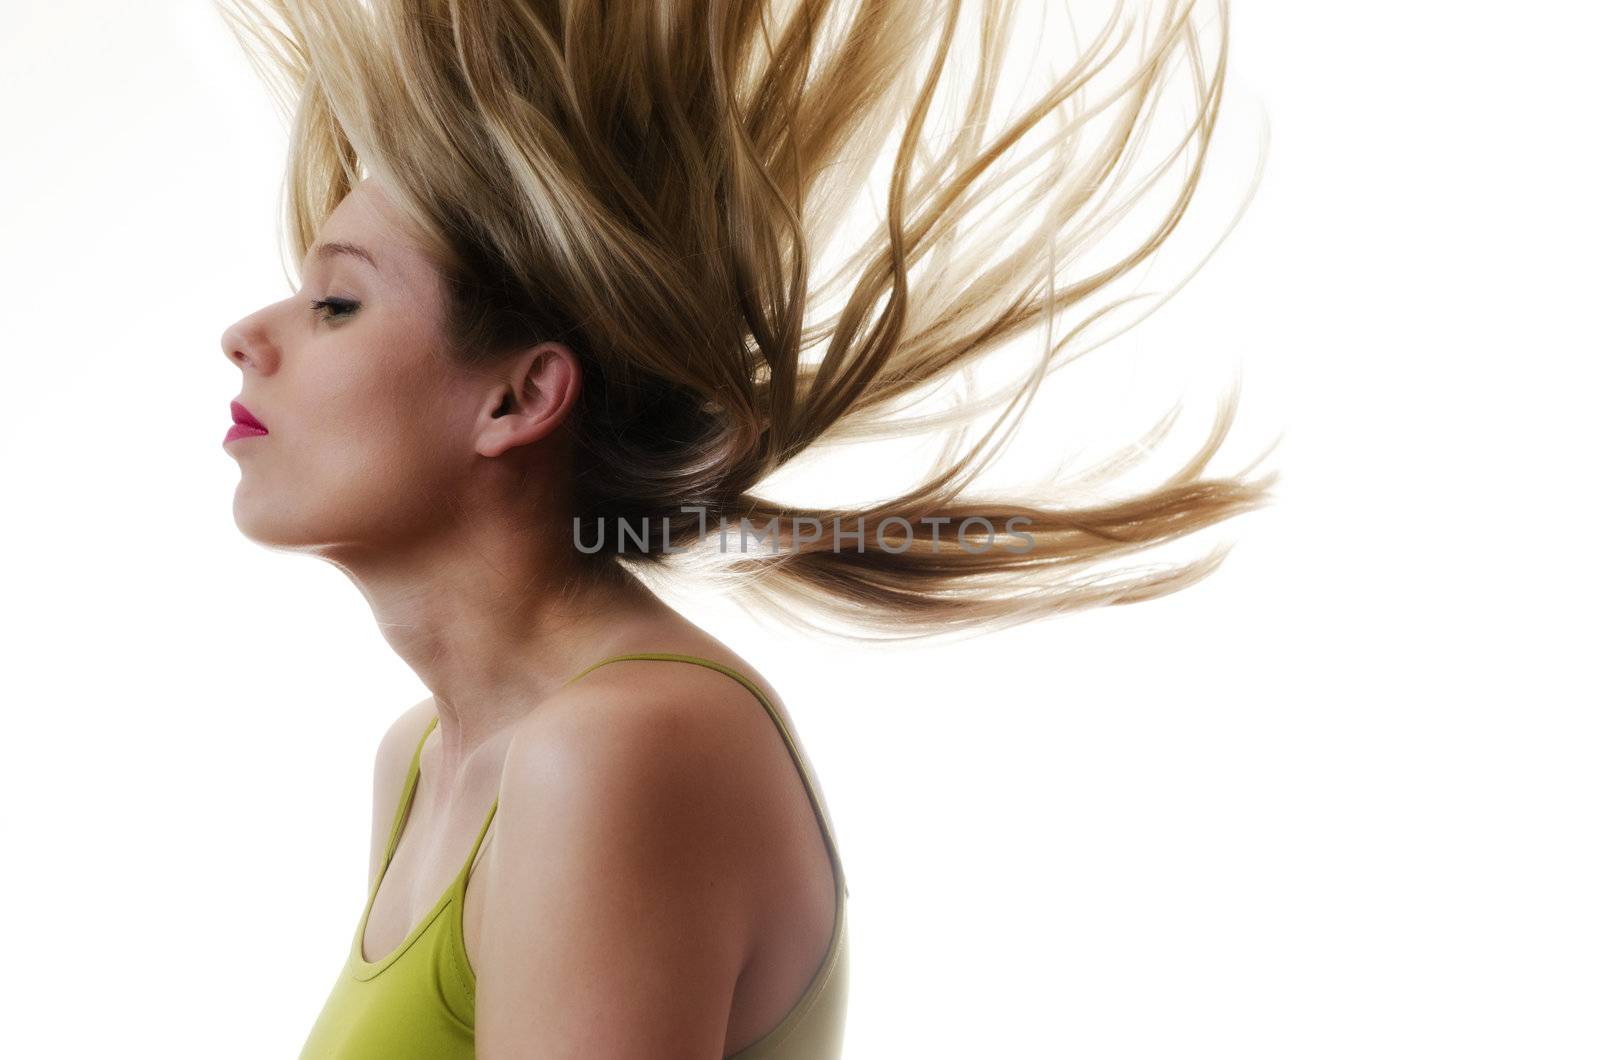 woman with hair flying in the air on white background by Grufnar